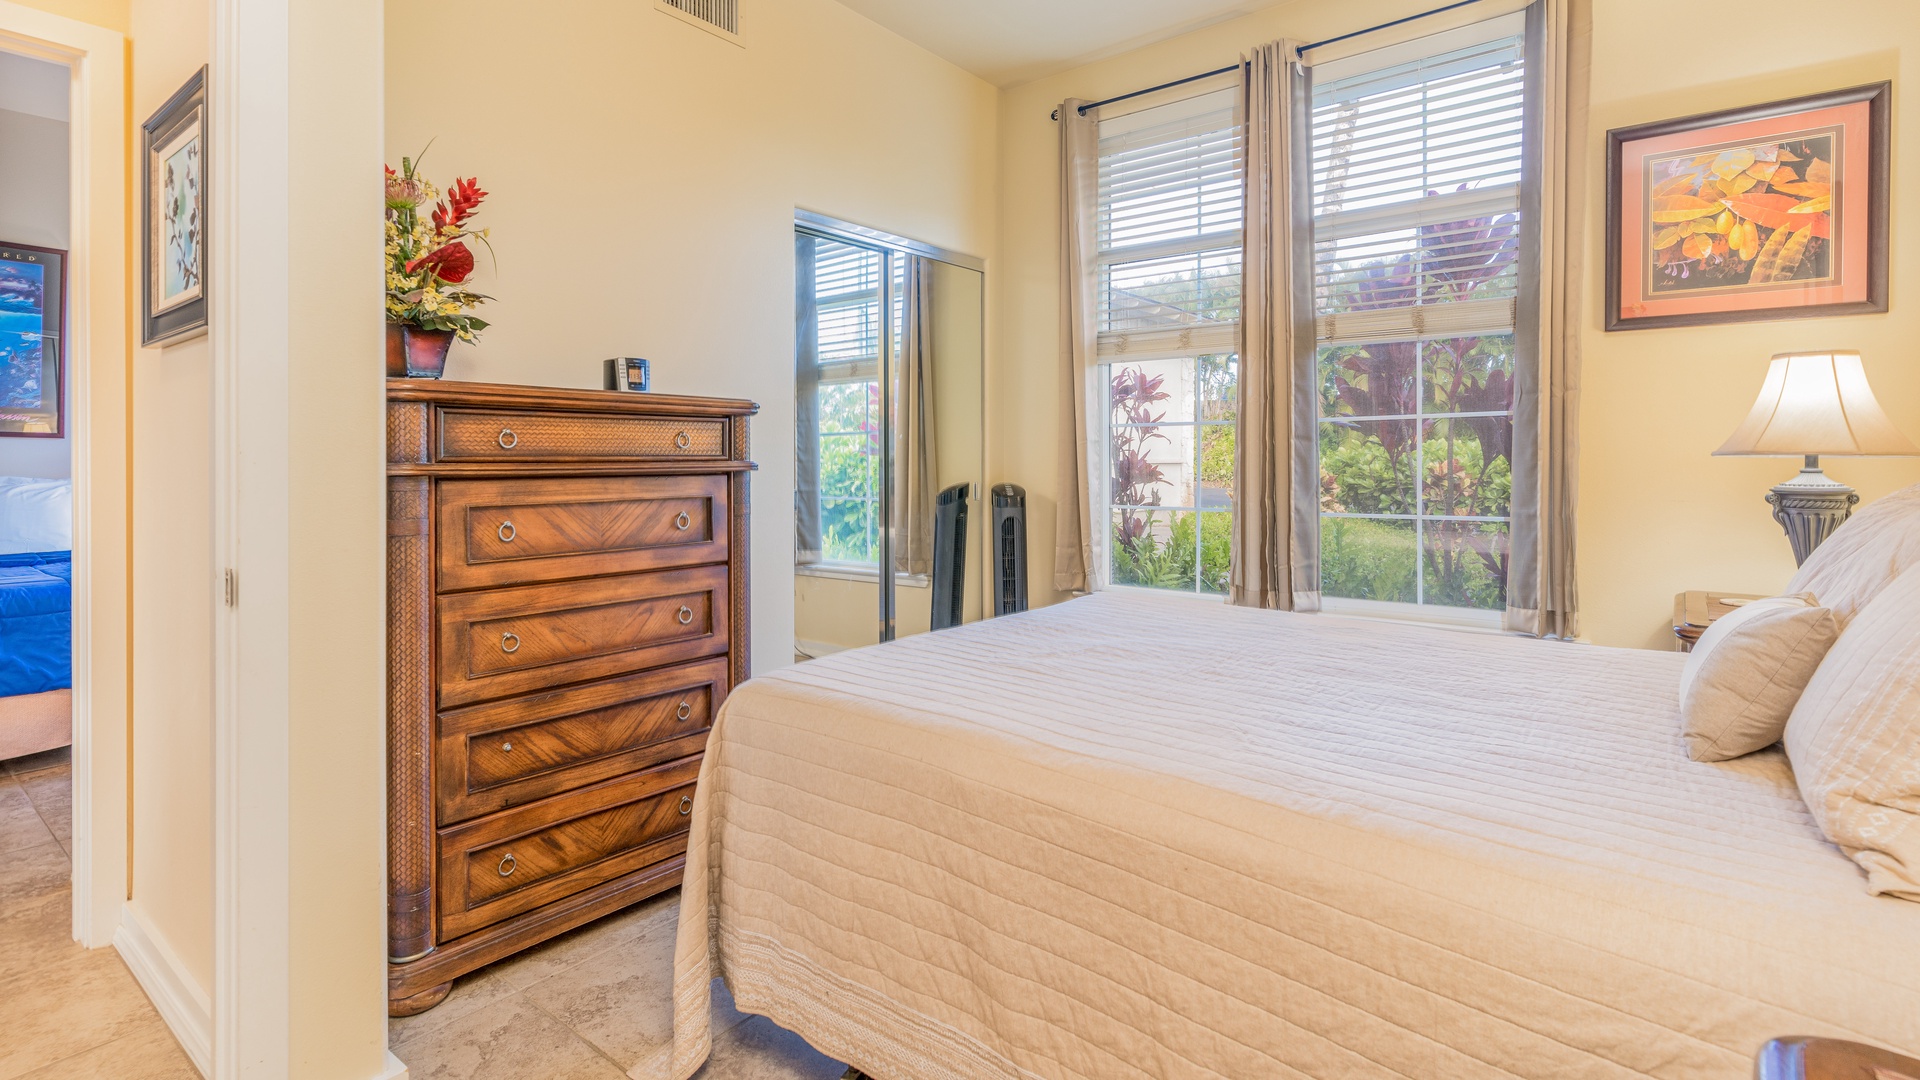 Kapolei Vacation Rentals, Kai Lani 8B - The second guest bedroom features a dresser and comfortable space.